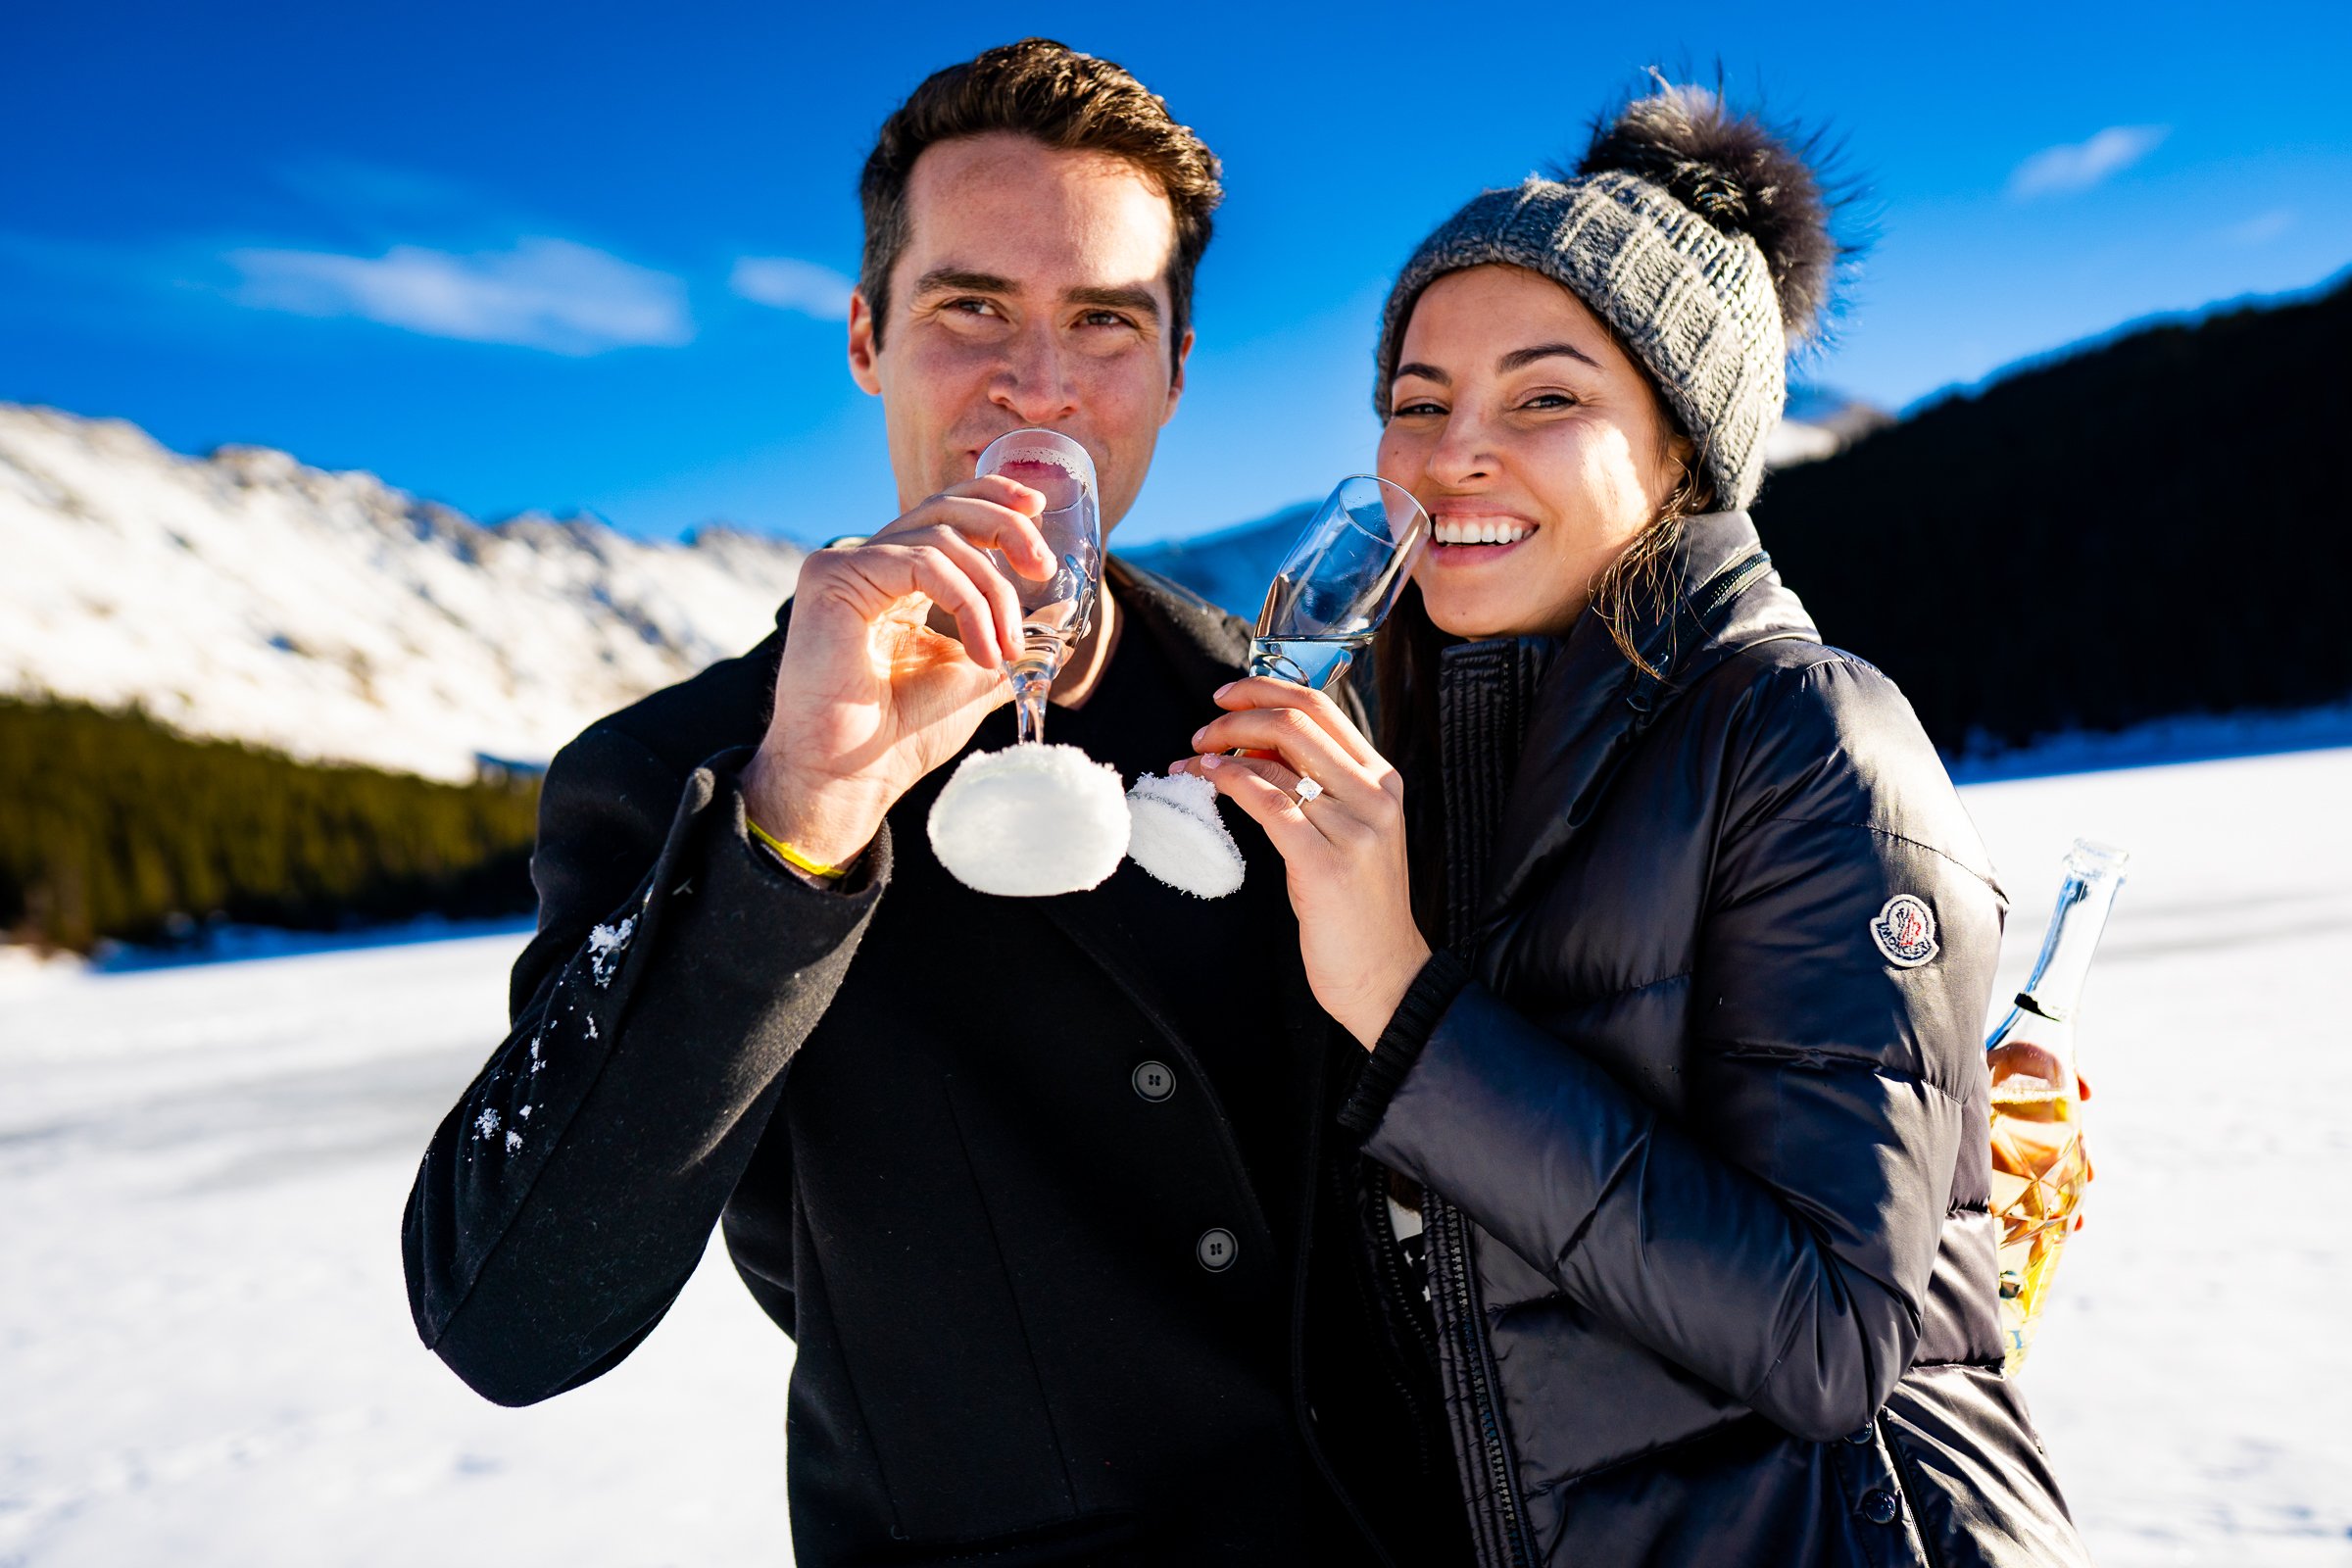 Engaged couple celebrates proposal with champagne on frozen lake with snowcapped mountains in the background, Engagement Session, Engagement Photos, Engagement Photos Inspiration, Engagement Photography, Engagement Photographer, Winter Engagement Photos, Proposal Photos, Proposal Photographer, Proposal Photography, Winter Proposal, Mountain Proposal, Proposal Inspiration, Summit County engagement session, Summit County engagement photos, Summit County engagement photography, Summit County engagement photographer, Summit County engagement inspiration, Colorado engagement session, Colorado engagement photos, Colorado engagement photography, Colorado engagement photographer, Colorado engagement inspiration, Clinton Gulch Engagement